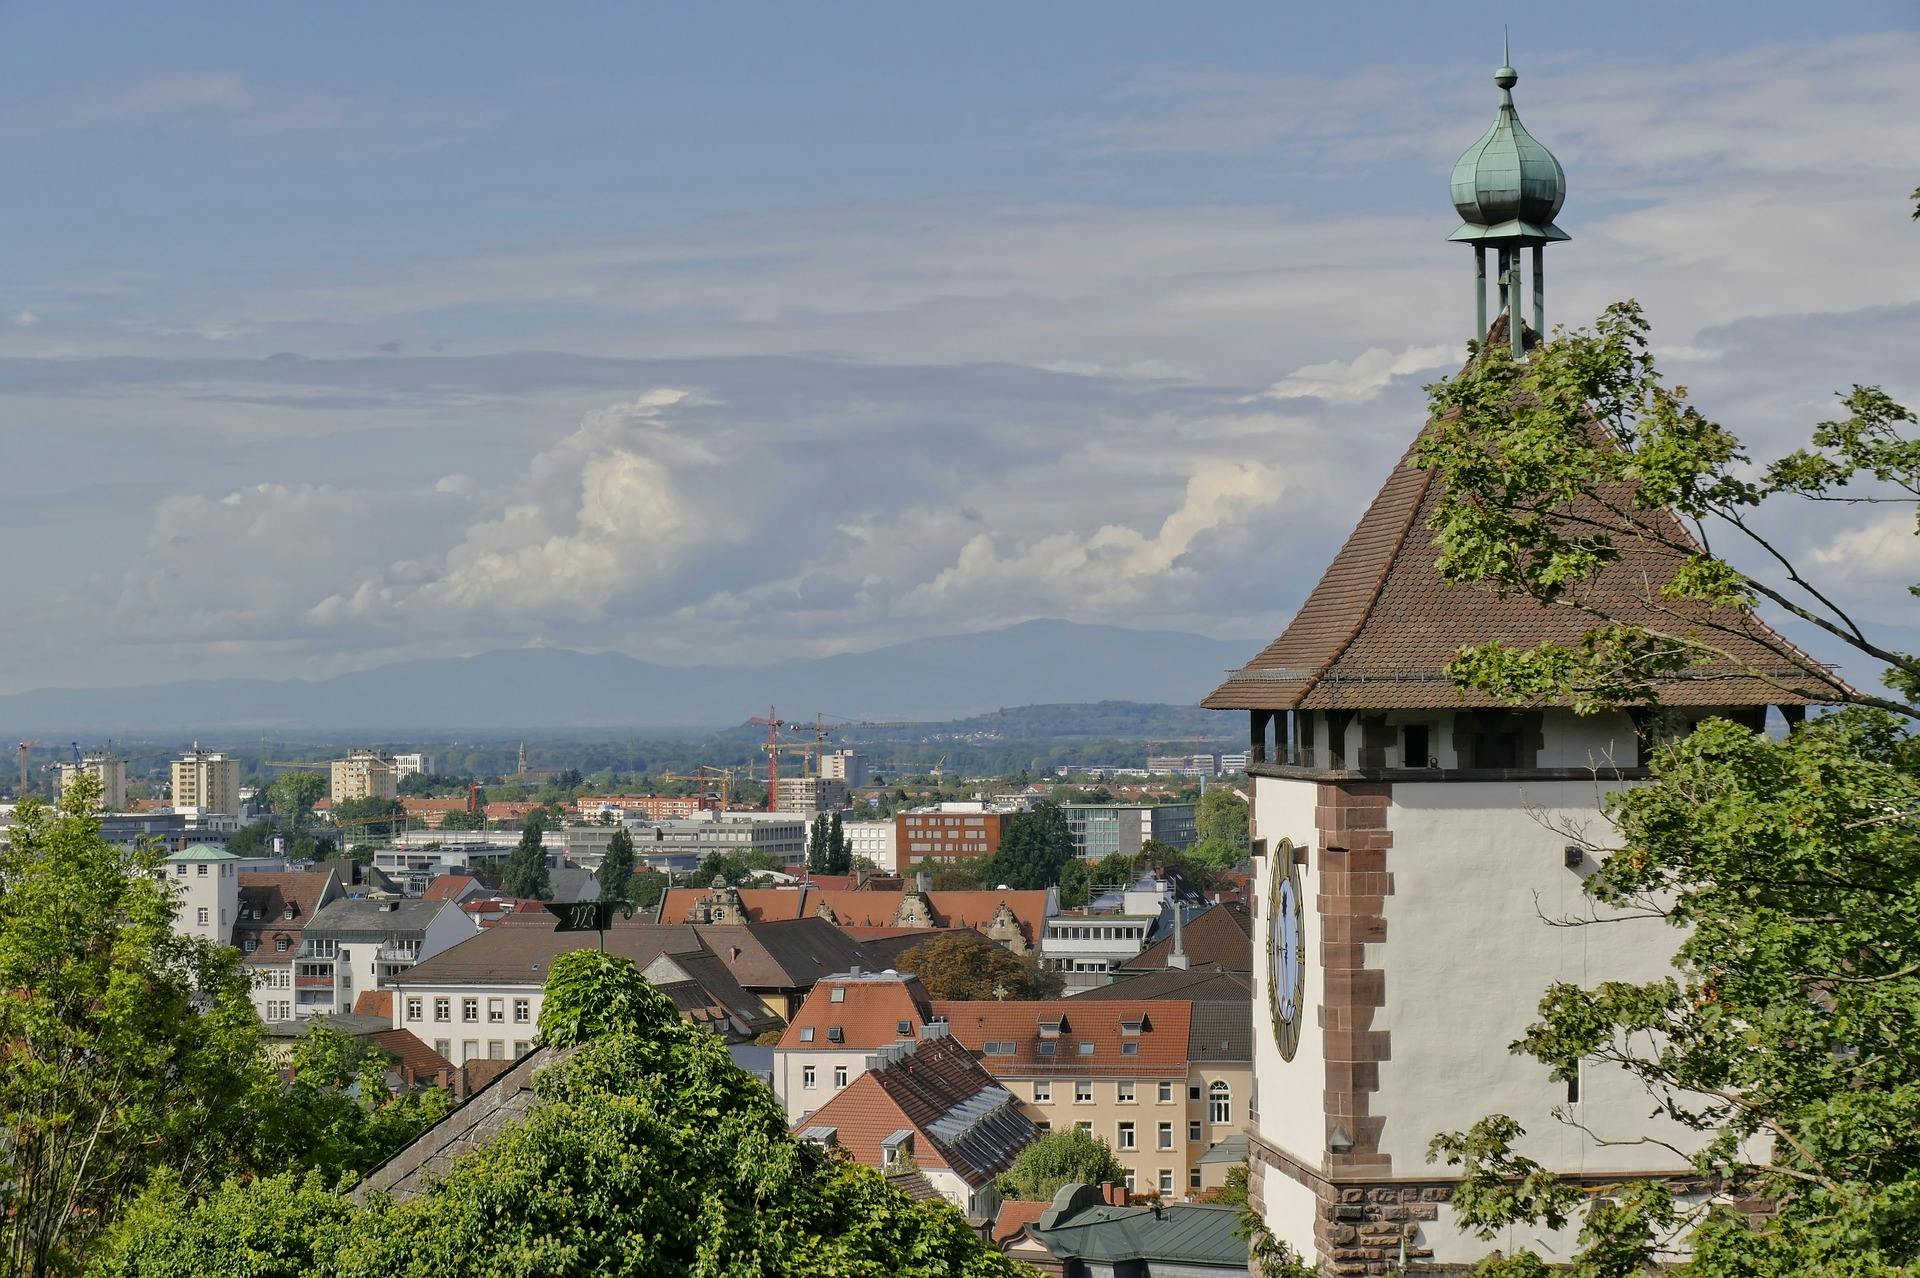 1-hour walking tour of Freiburg with a local